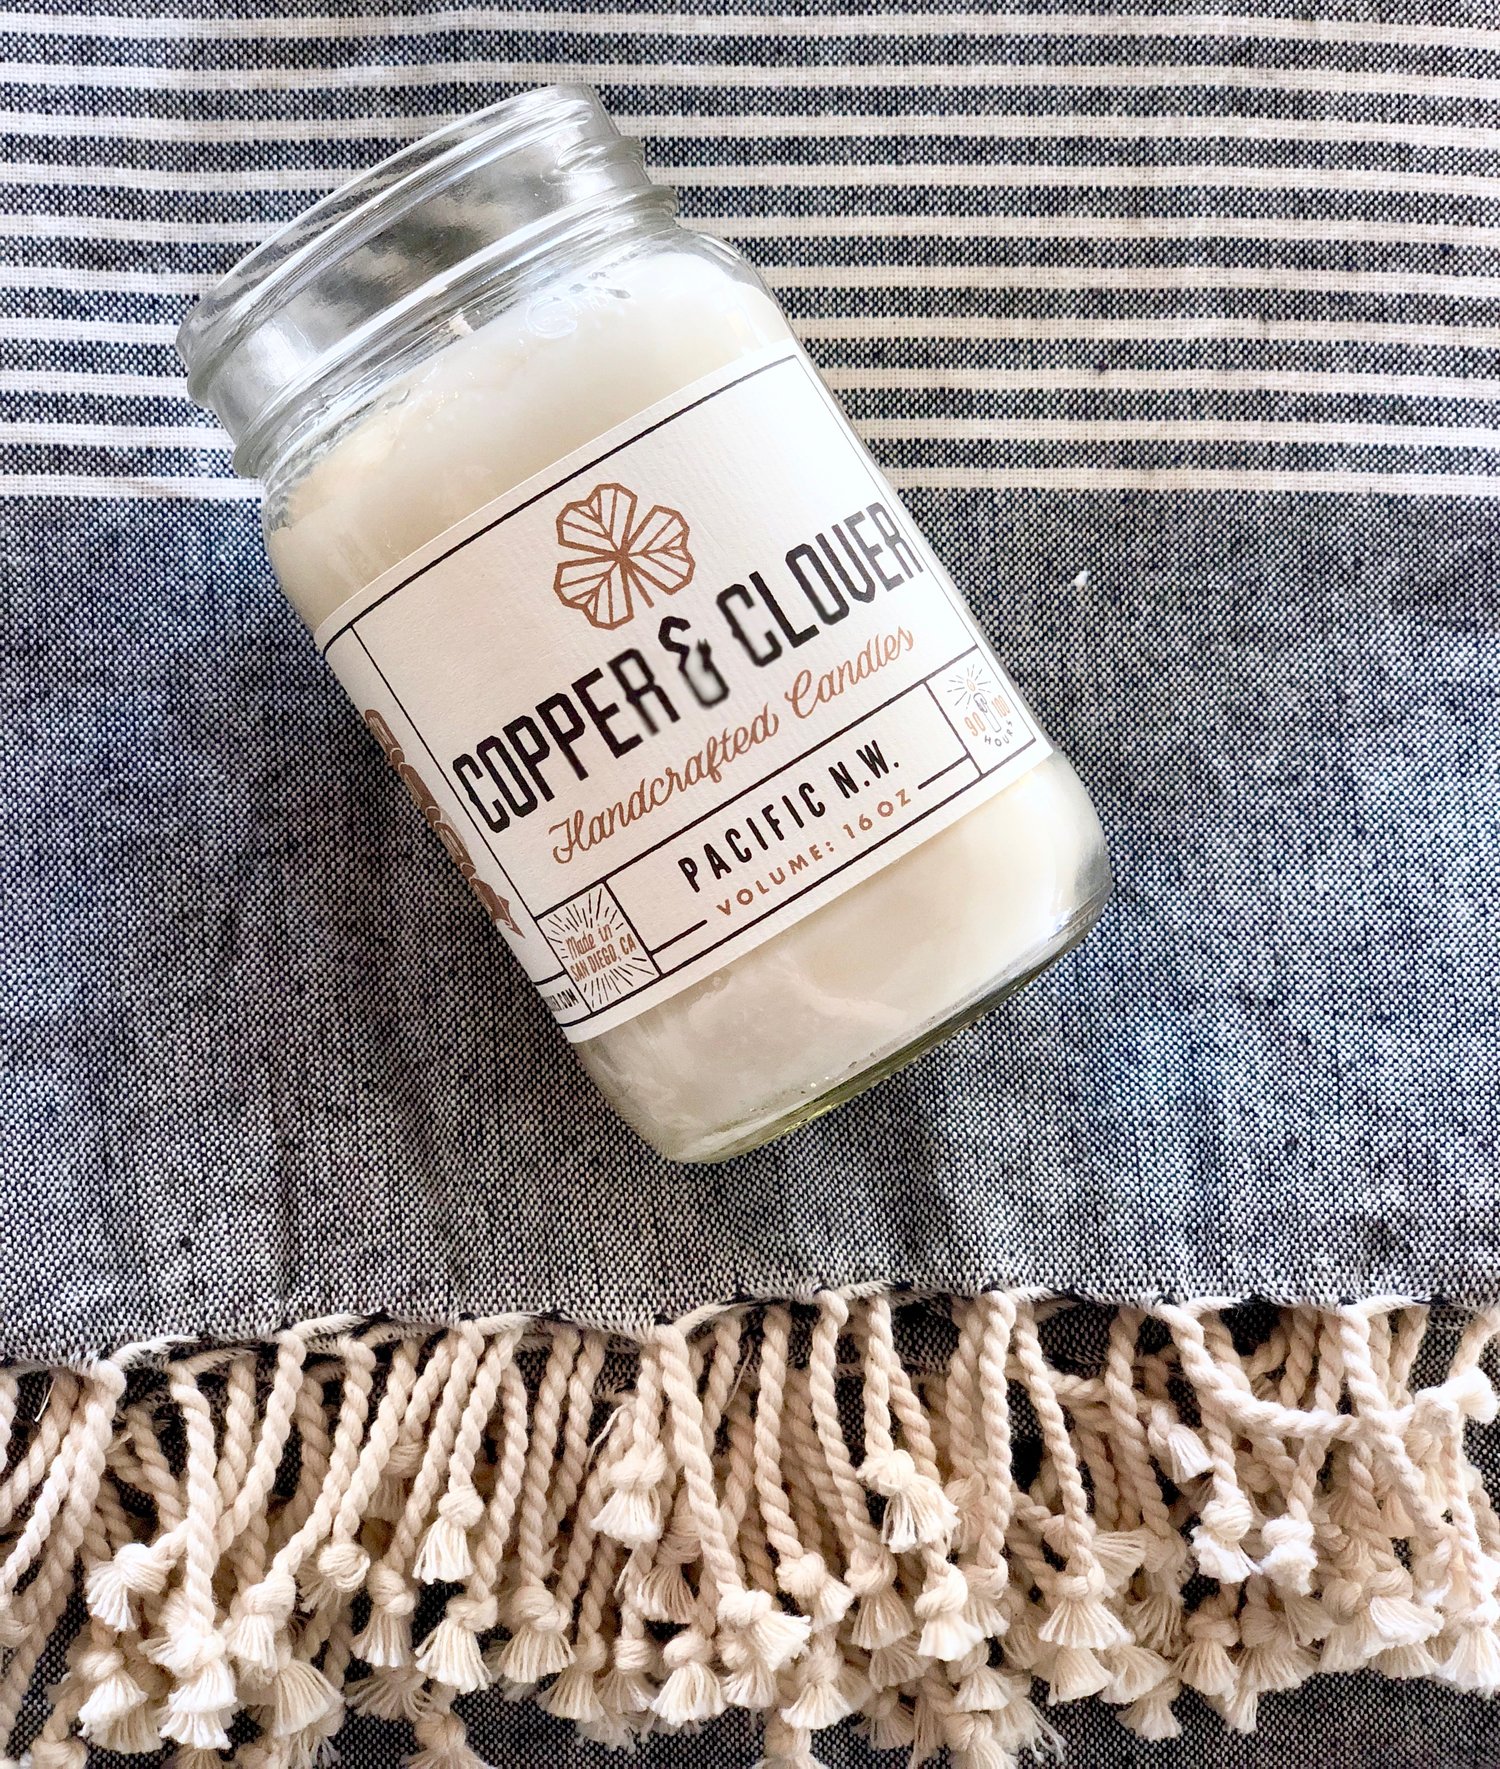  Pacific Northwest Candle by Copper &amp; Clover {$26.00}&nbsp; Notes of lavender, musk, oakmoss, and orange. 